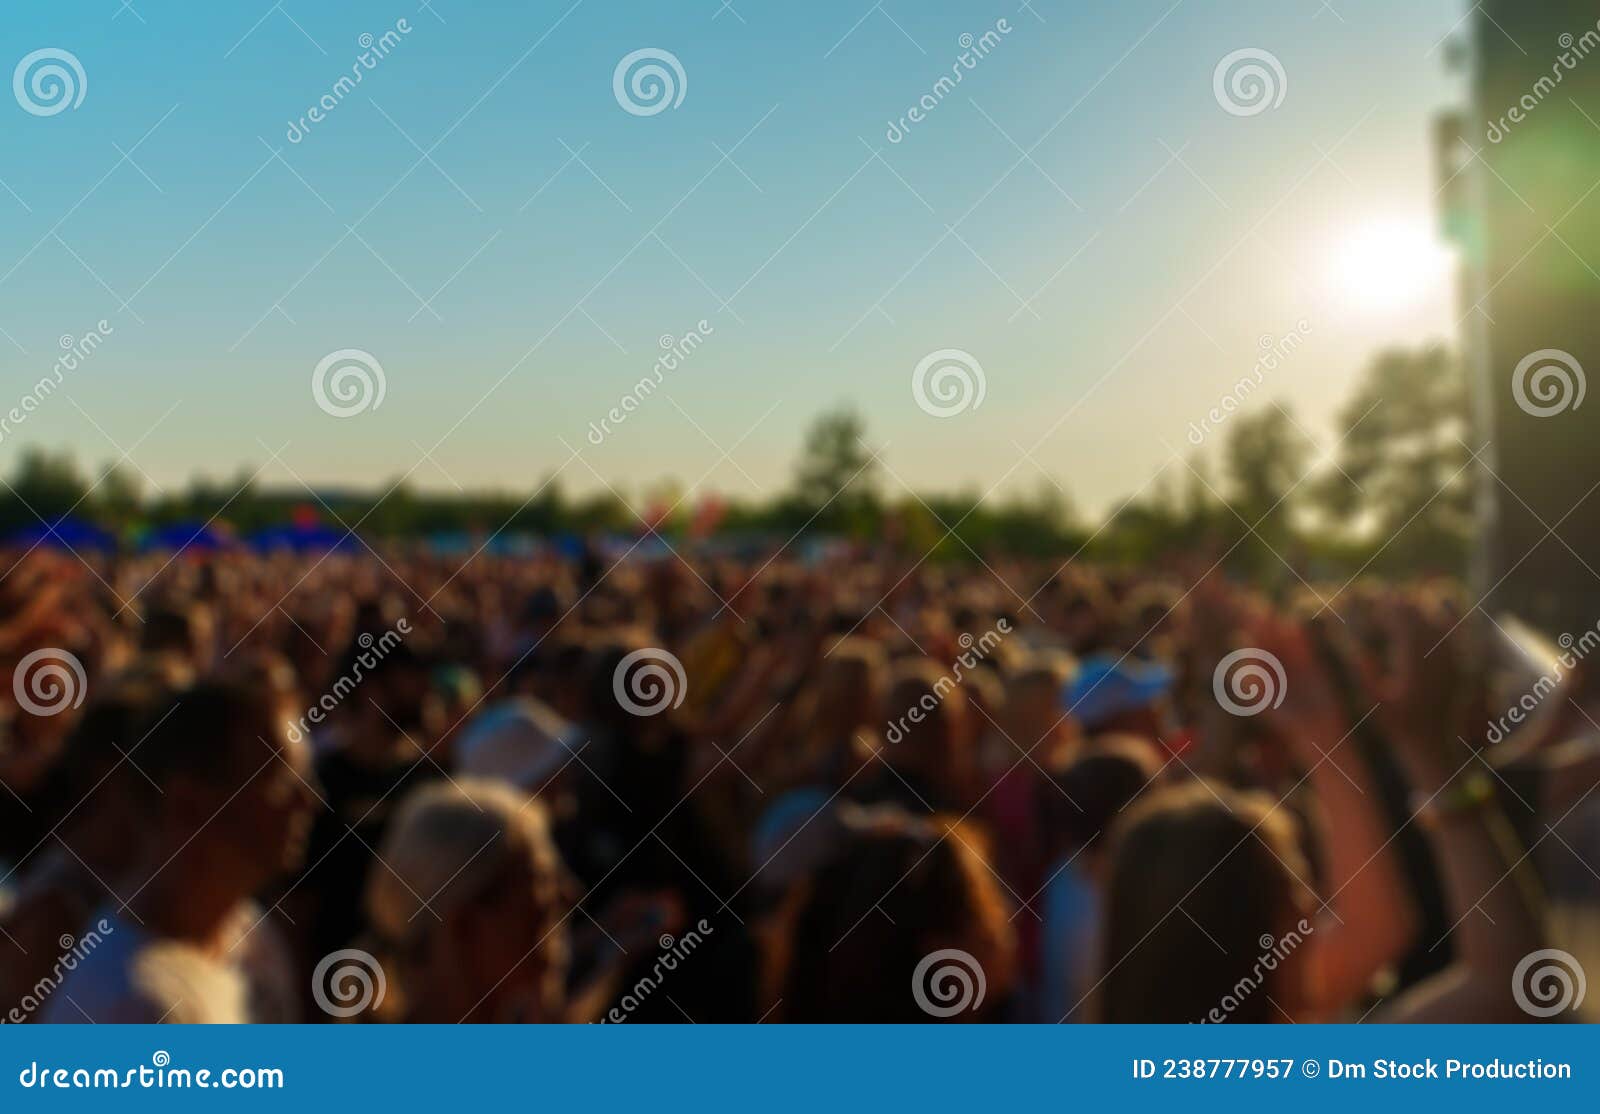 People Watching Music Concert Editorial Photography - Image of public ...